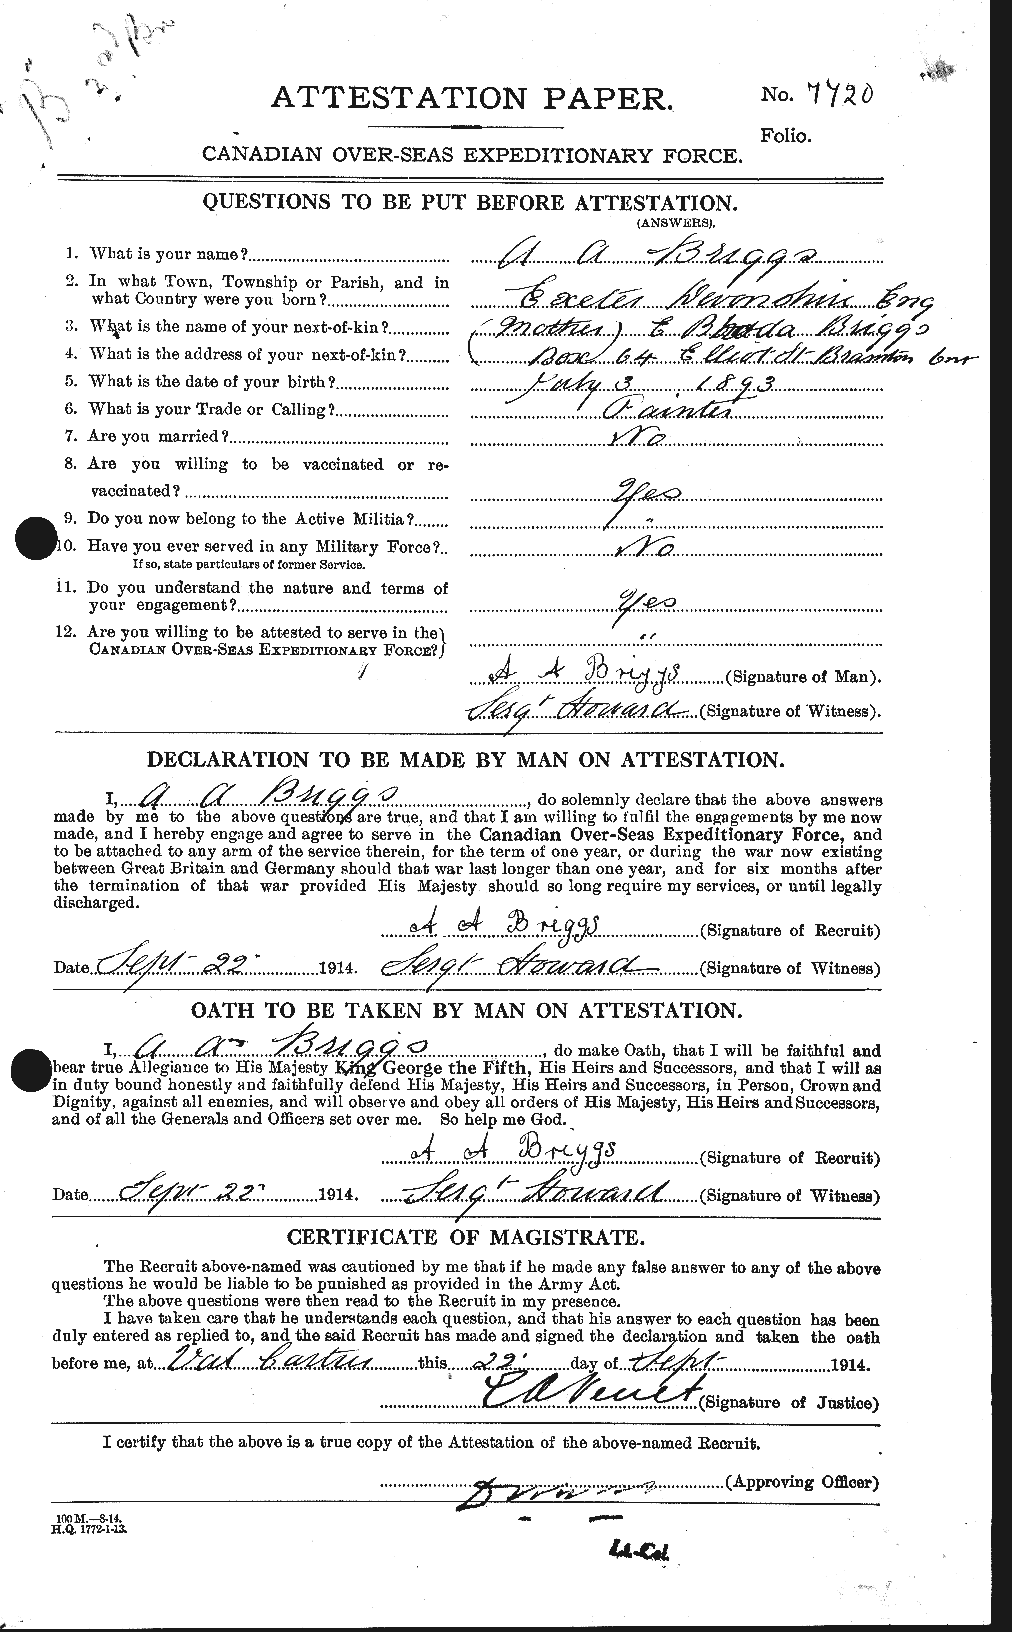 Personnel Records of the First World War - CEF 263951a